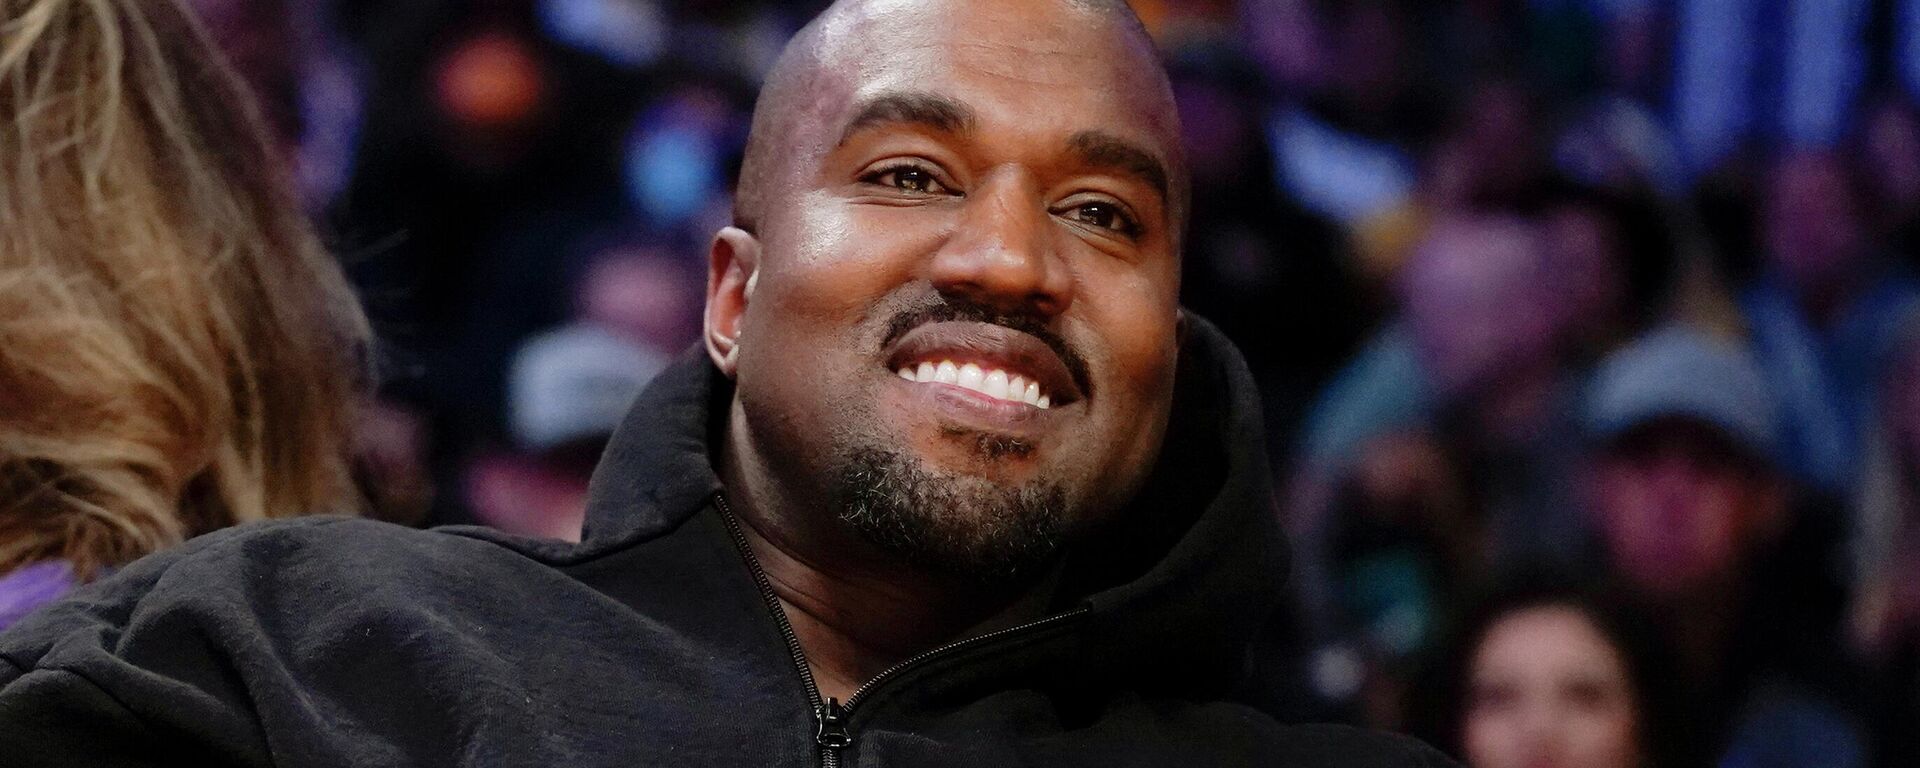 FILE - Kanye West watches the first half of an NBA basketball game between the Washington Wizards and the Los Angeles Lakers in Los Angeles, on March 11, 2022 A completed documentary about the rapper formerly known as Kanye West has been shelved amid his recent slew of antisemitic remark - Sputnik International, 1920, 25.10.2022